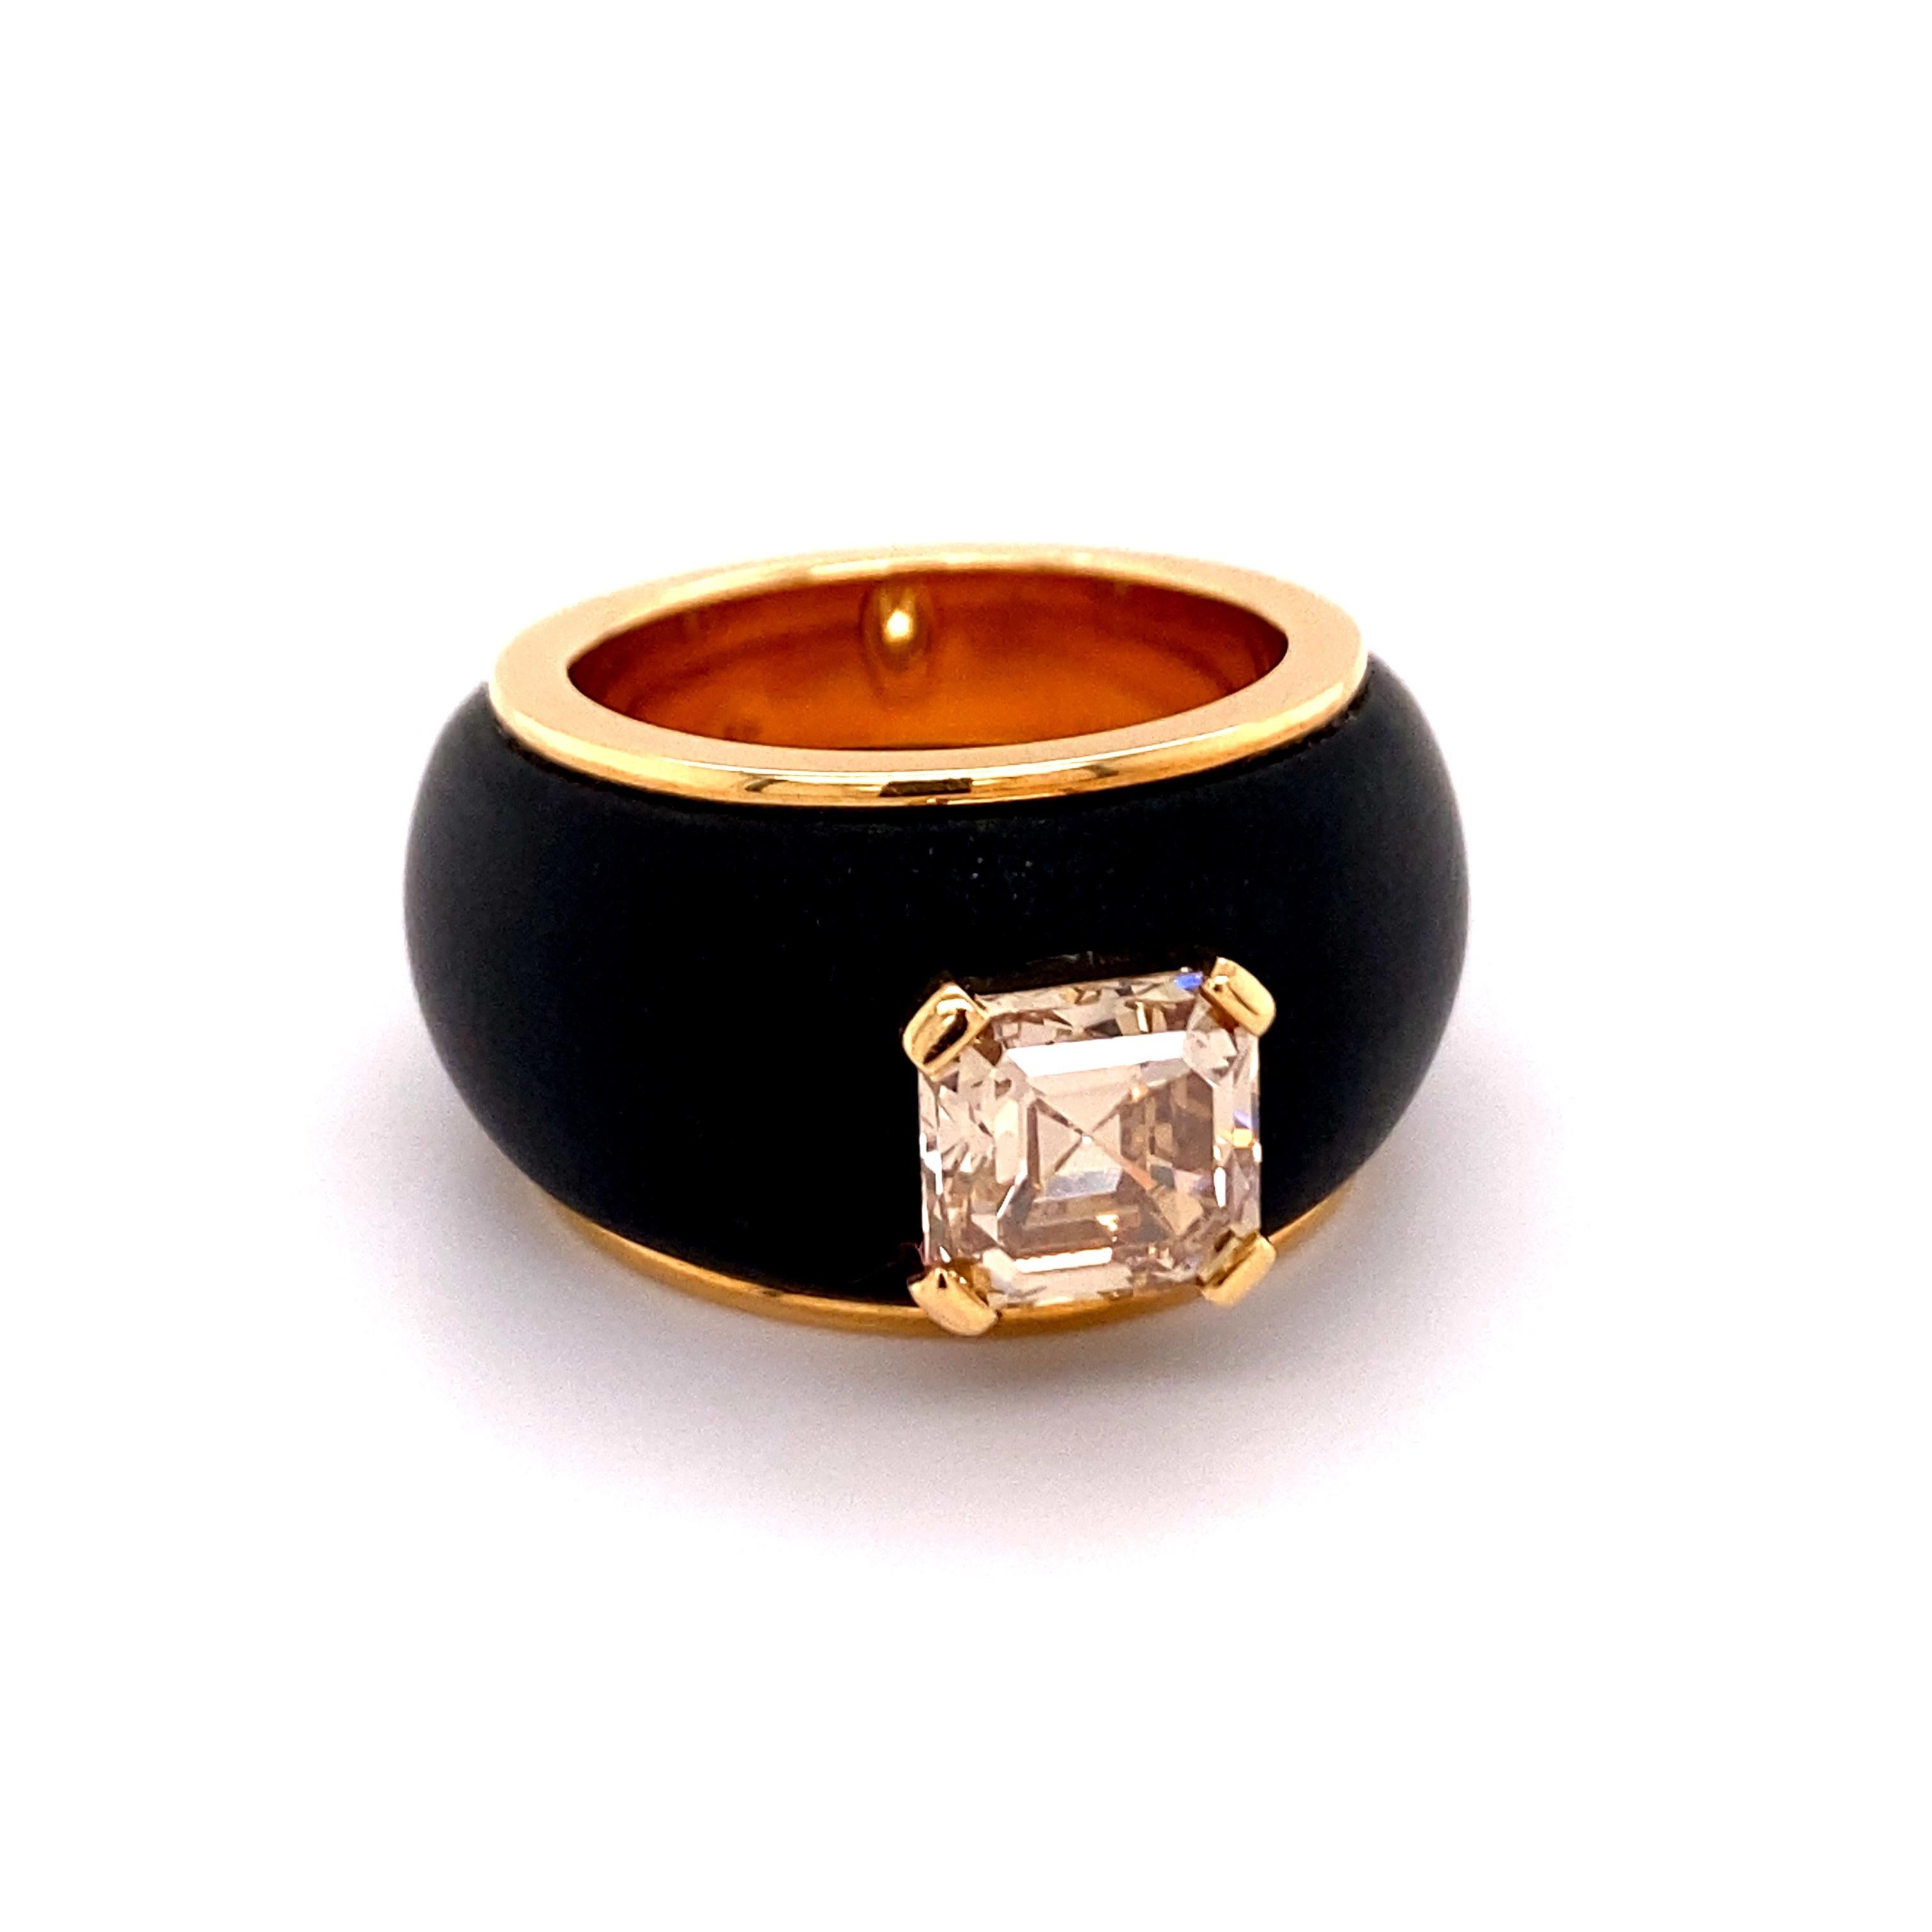 This Ring captivates with its simple and modern design.
The fancy light brown Assher cut Diamond with a weight of 2.65 ct and si1 quality is certified by the Swiss Gemmological Institute.
The Asscher cut was created in 1902 by Joseph Isaac’s